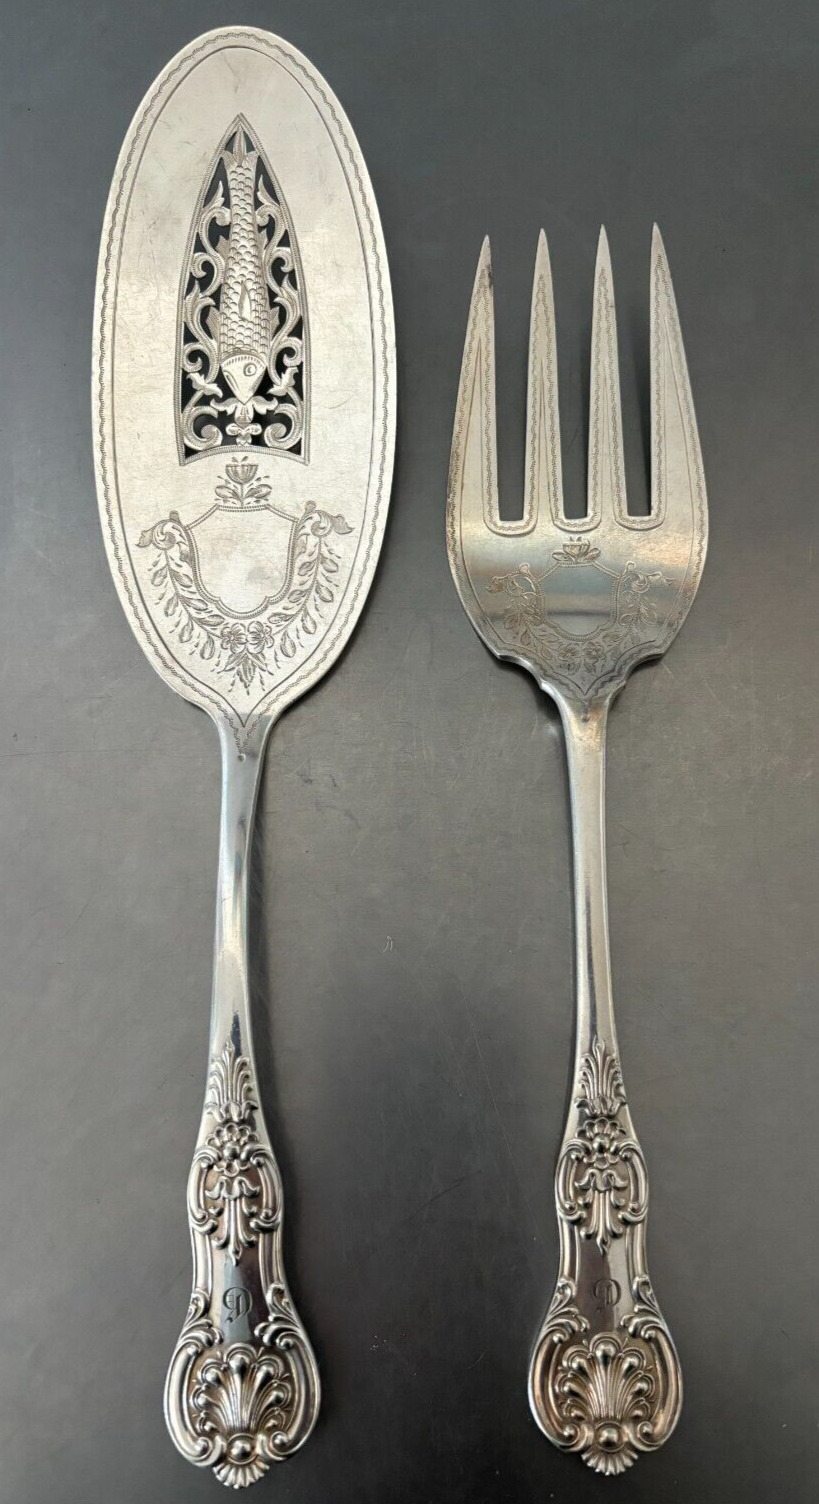 Antique Martin Hall & Co KINGS FISH SERVING SET Silver Plated Slice & Fork Mono